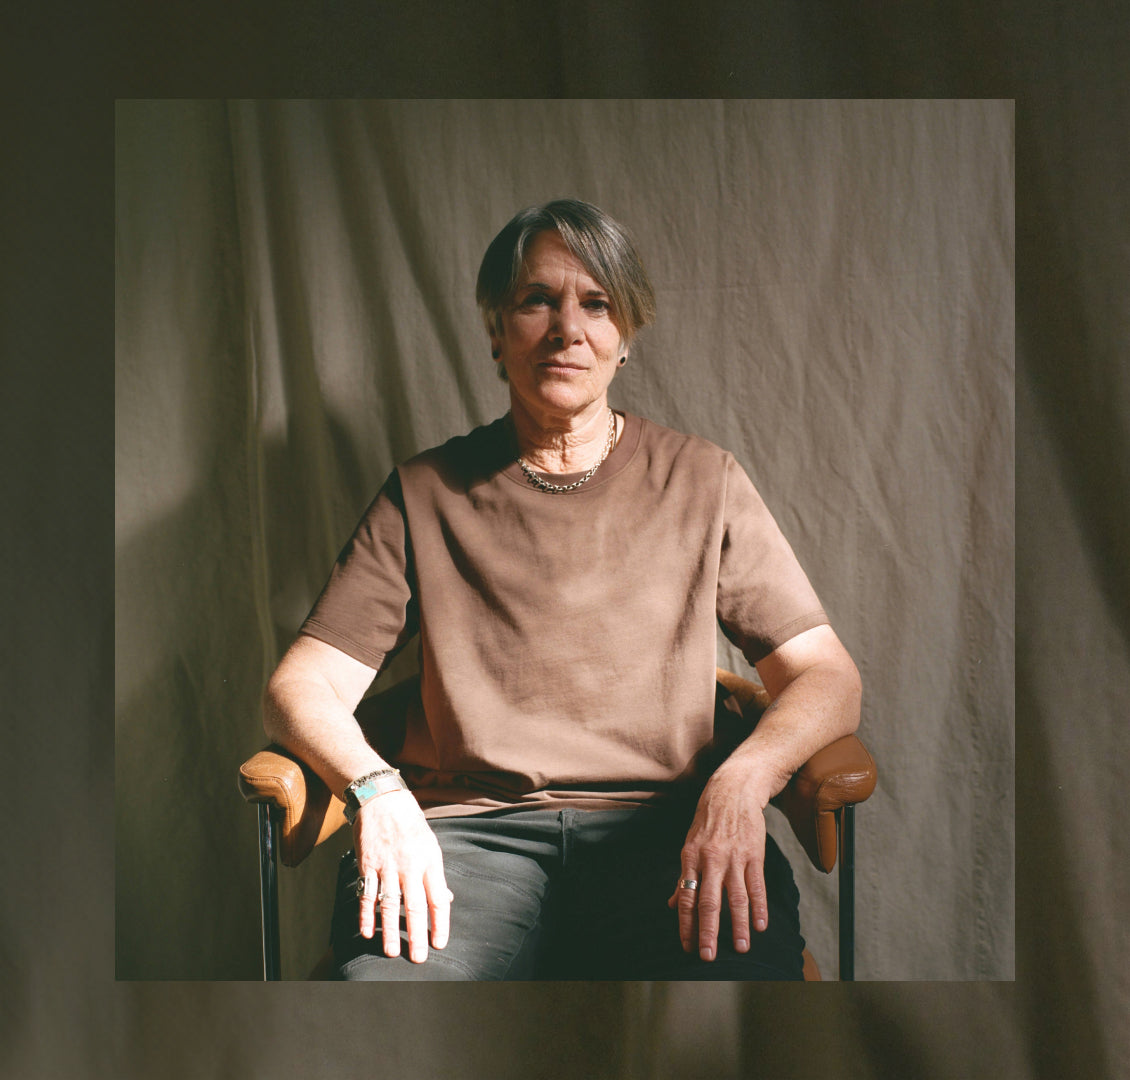 Older queer person in brown shirt sitting in chair against cloth backdrop